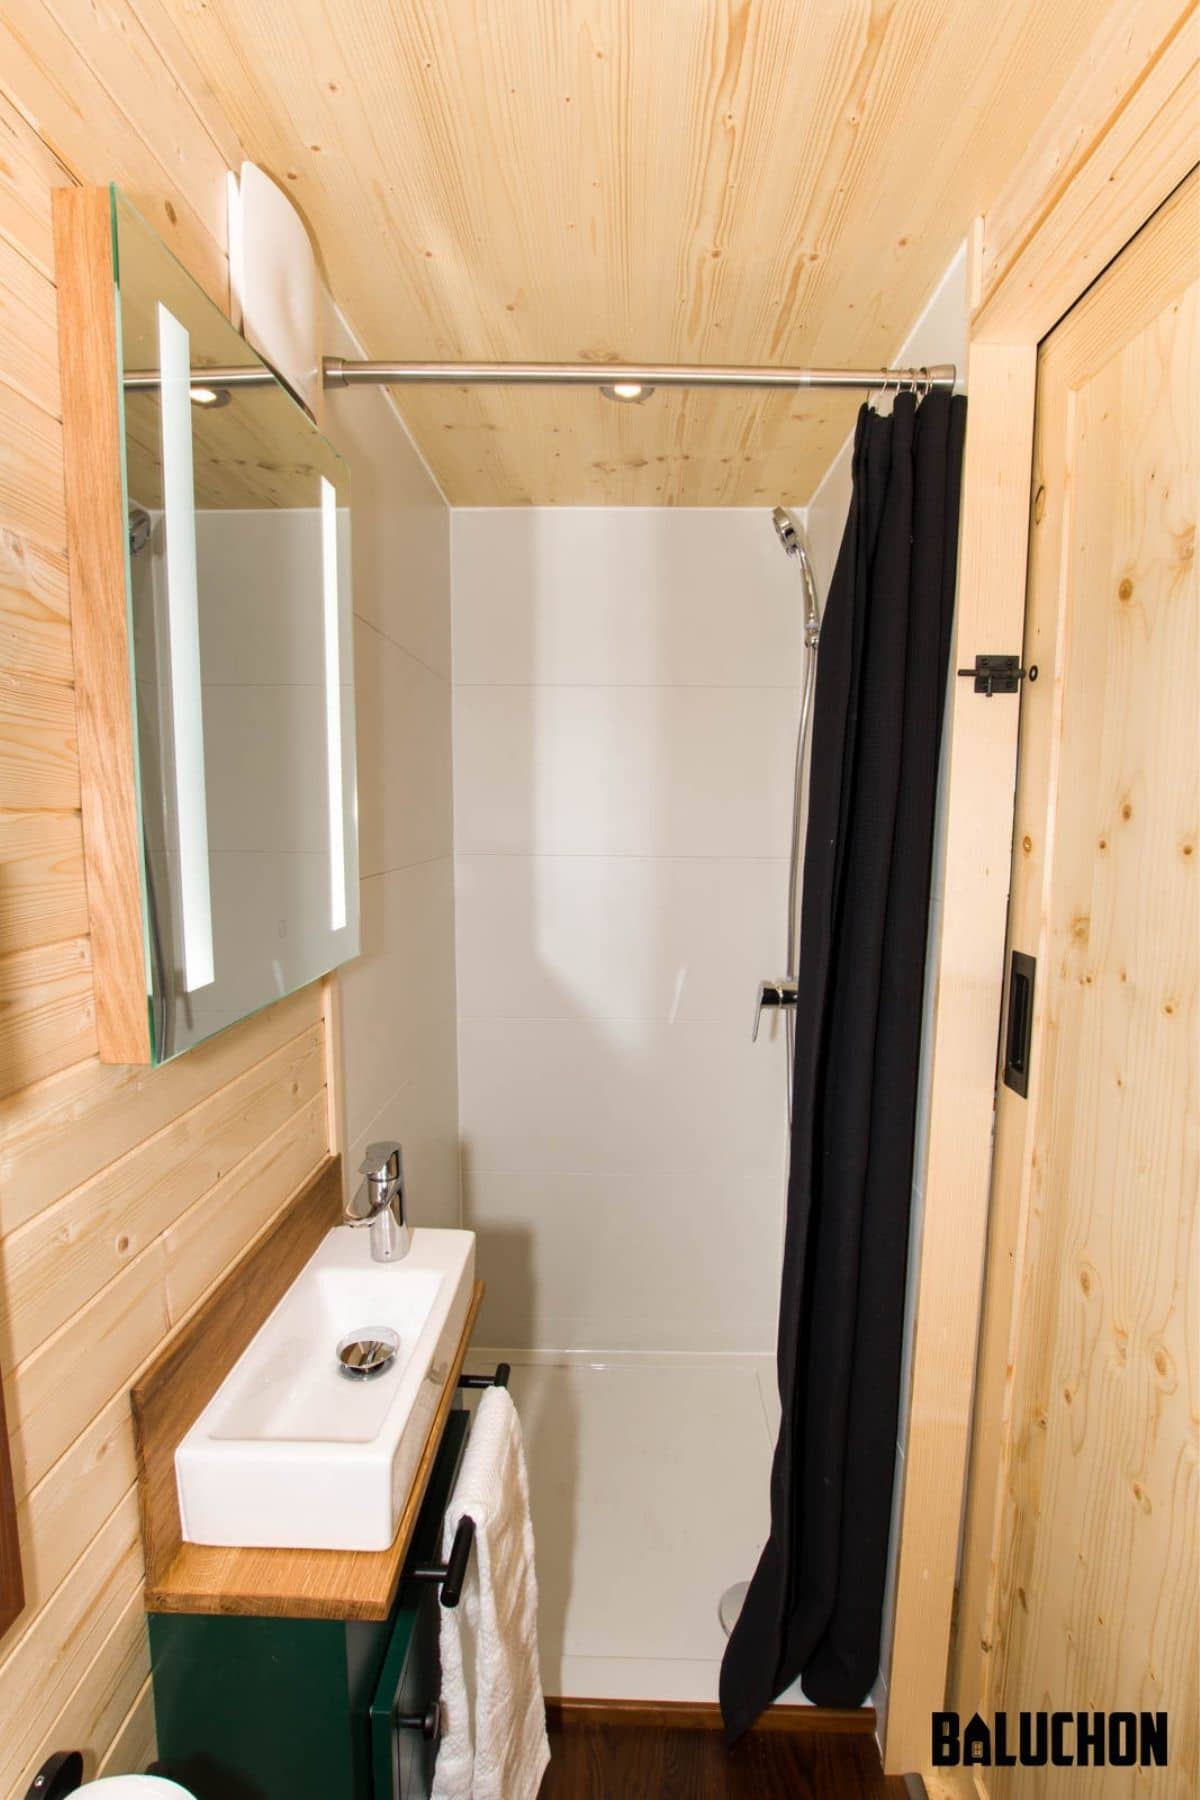 Shower stall in light wood bathroom with black curtain